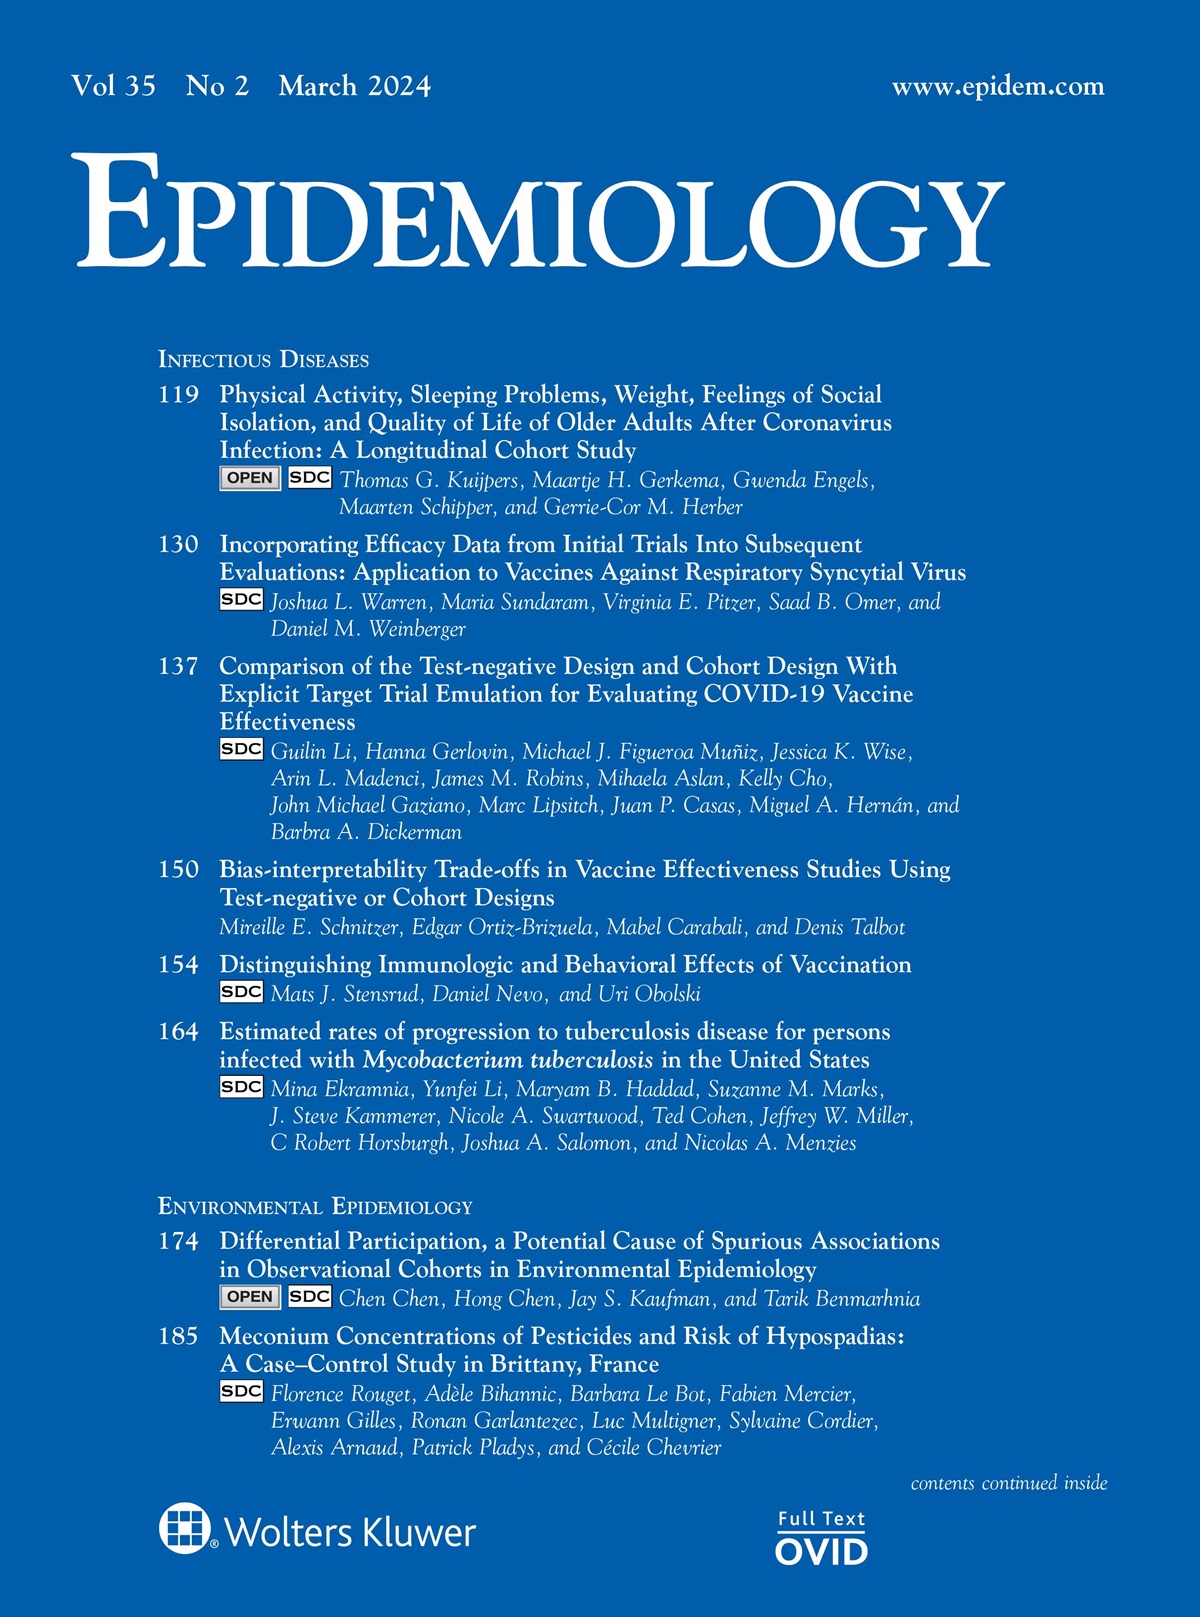 Are Target Trial Emulations the Gold Standard for Observational Studies?: The Authors Respond